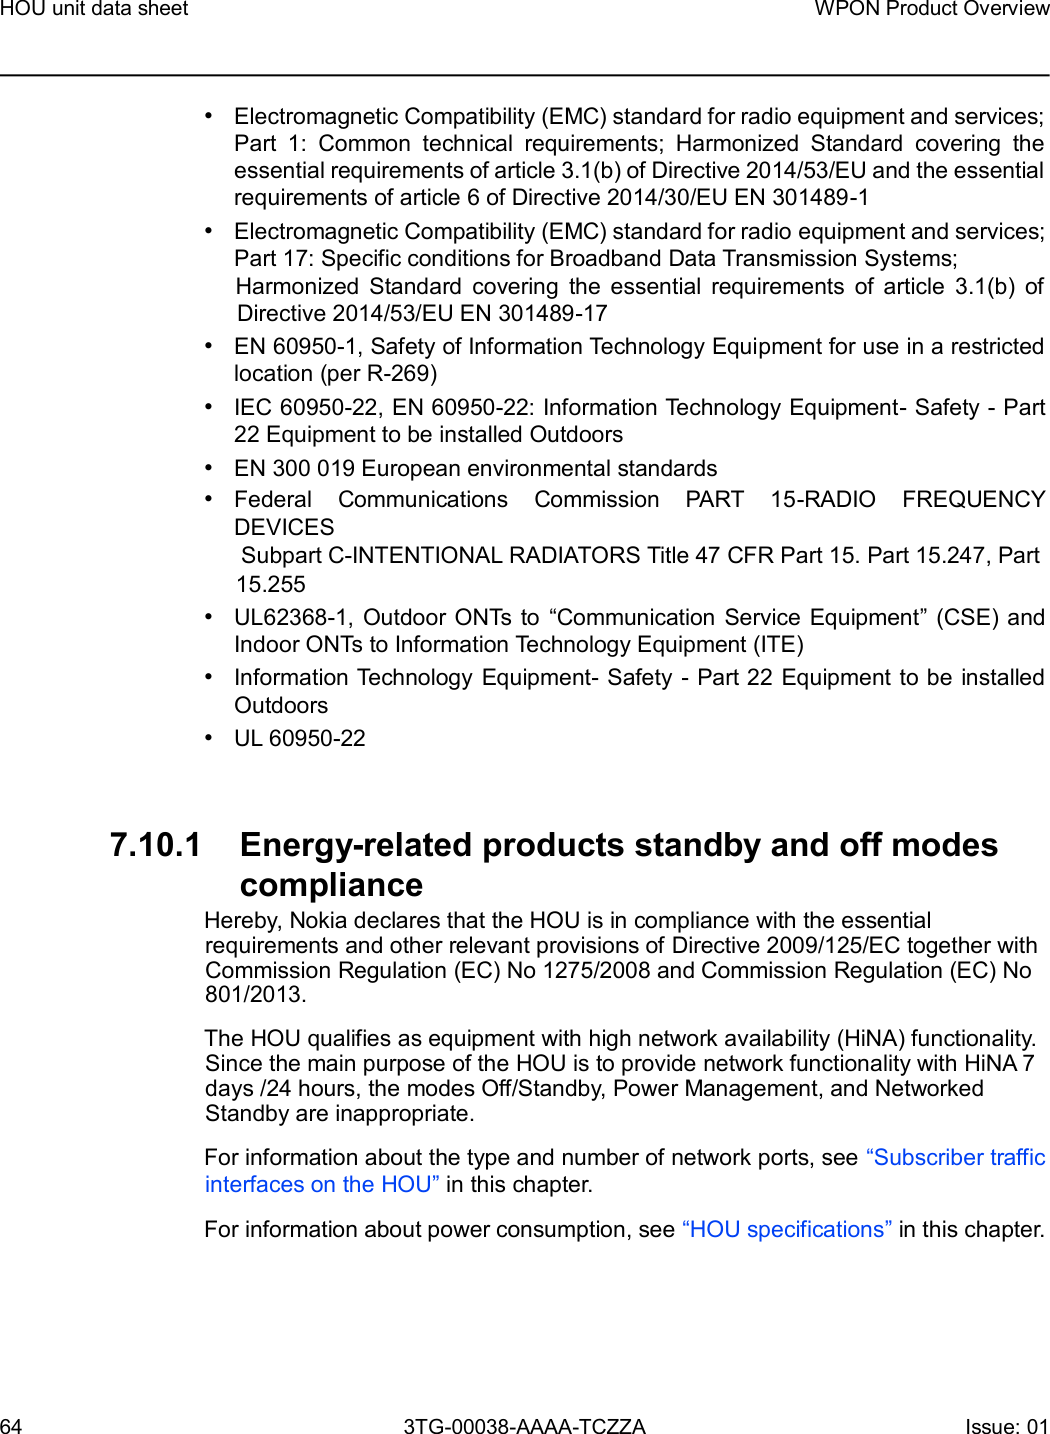 Page 64 of Nokia Bell 7577WPONAPAC WPON User Manual WPON Product Overview